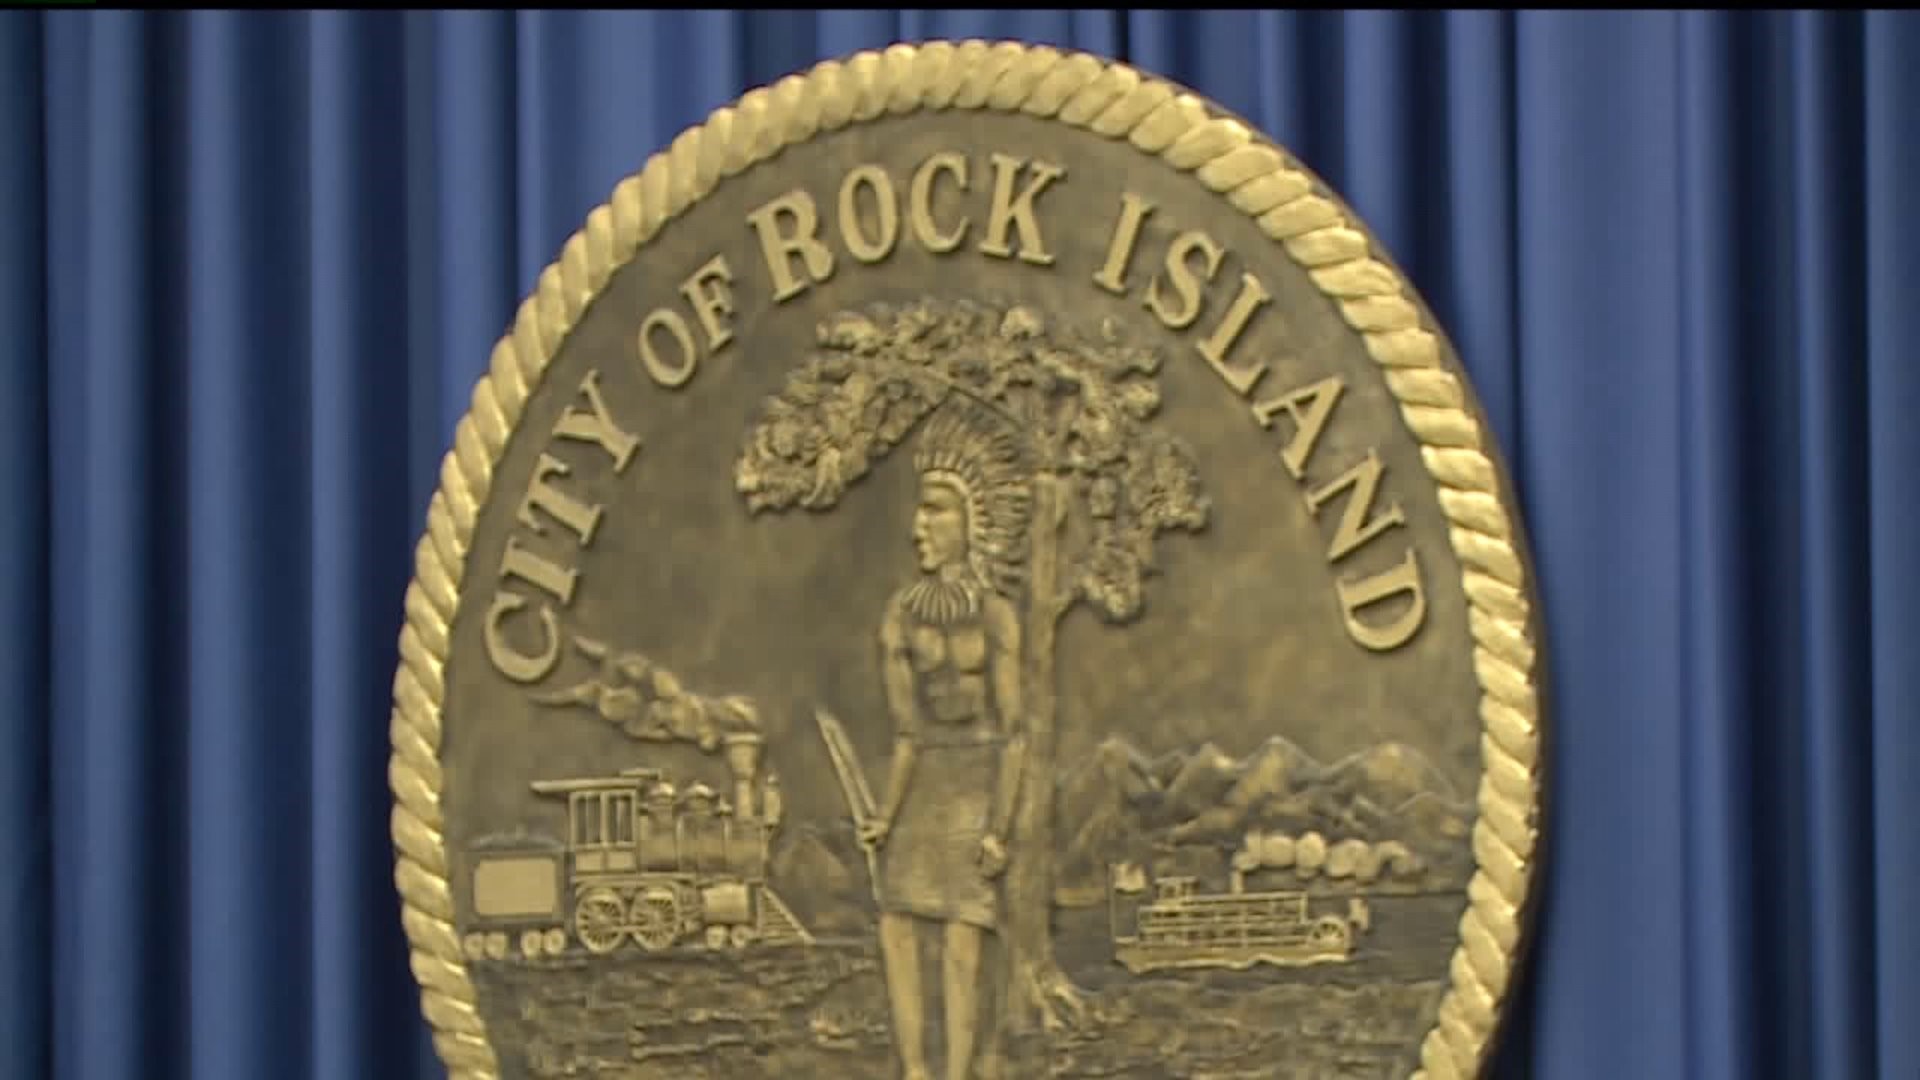 Rock Island s City Clerk stepping down because of ongoing workplace